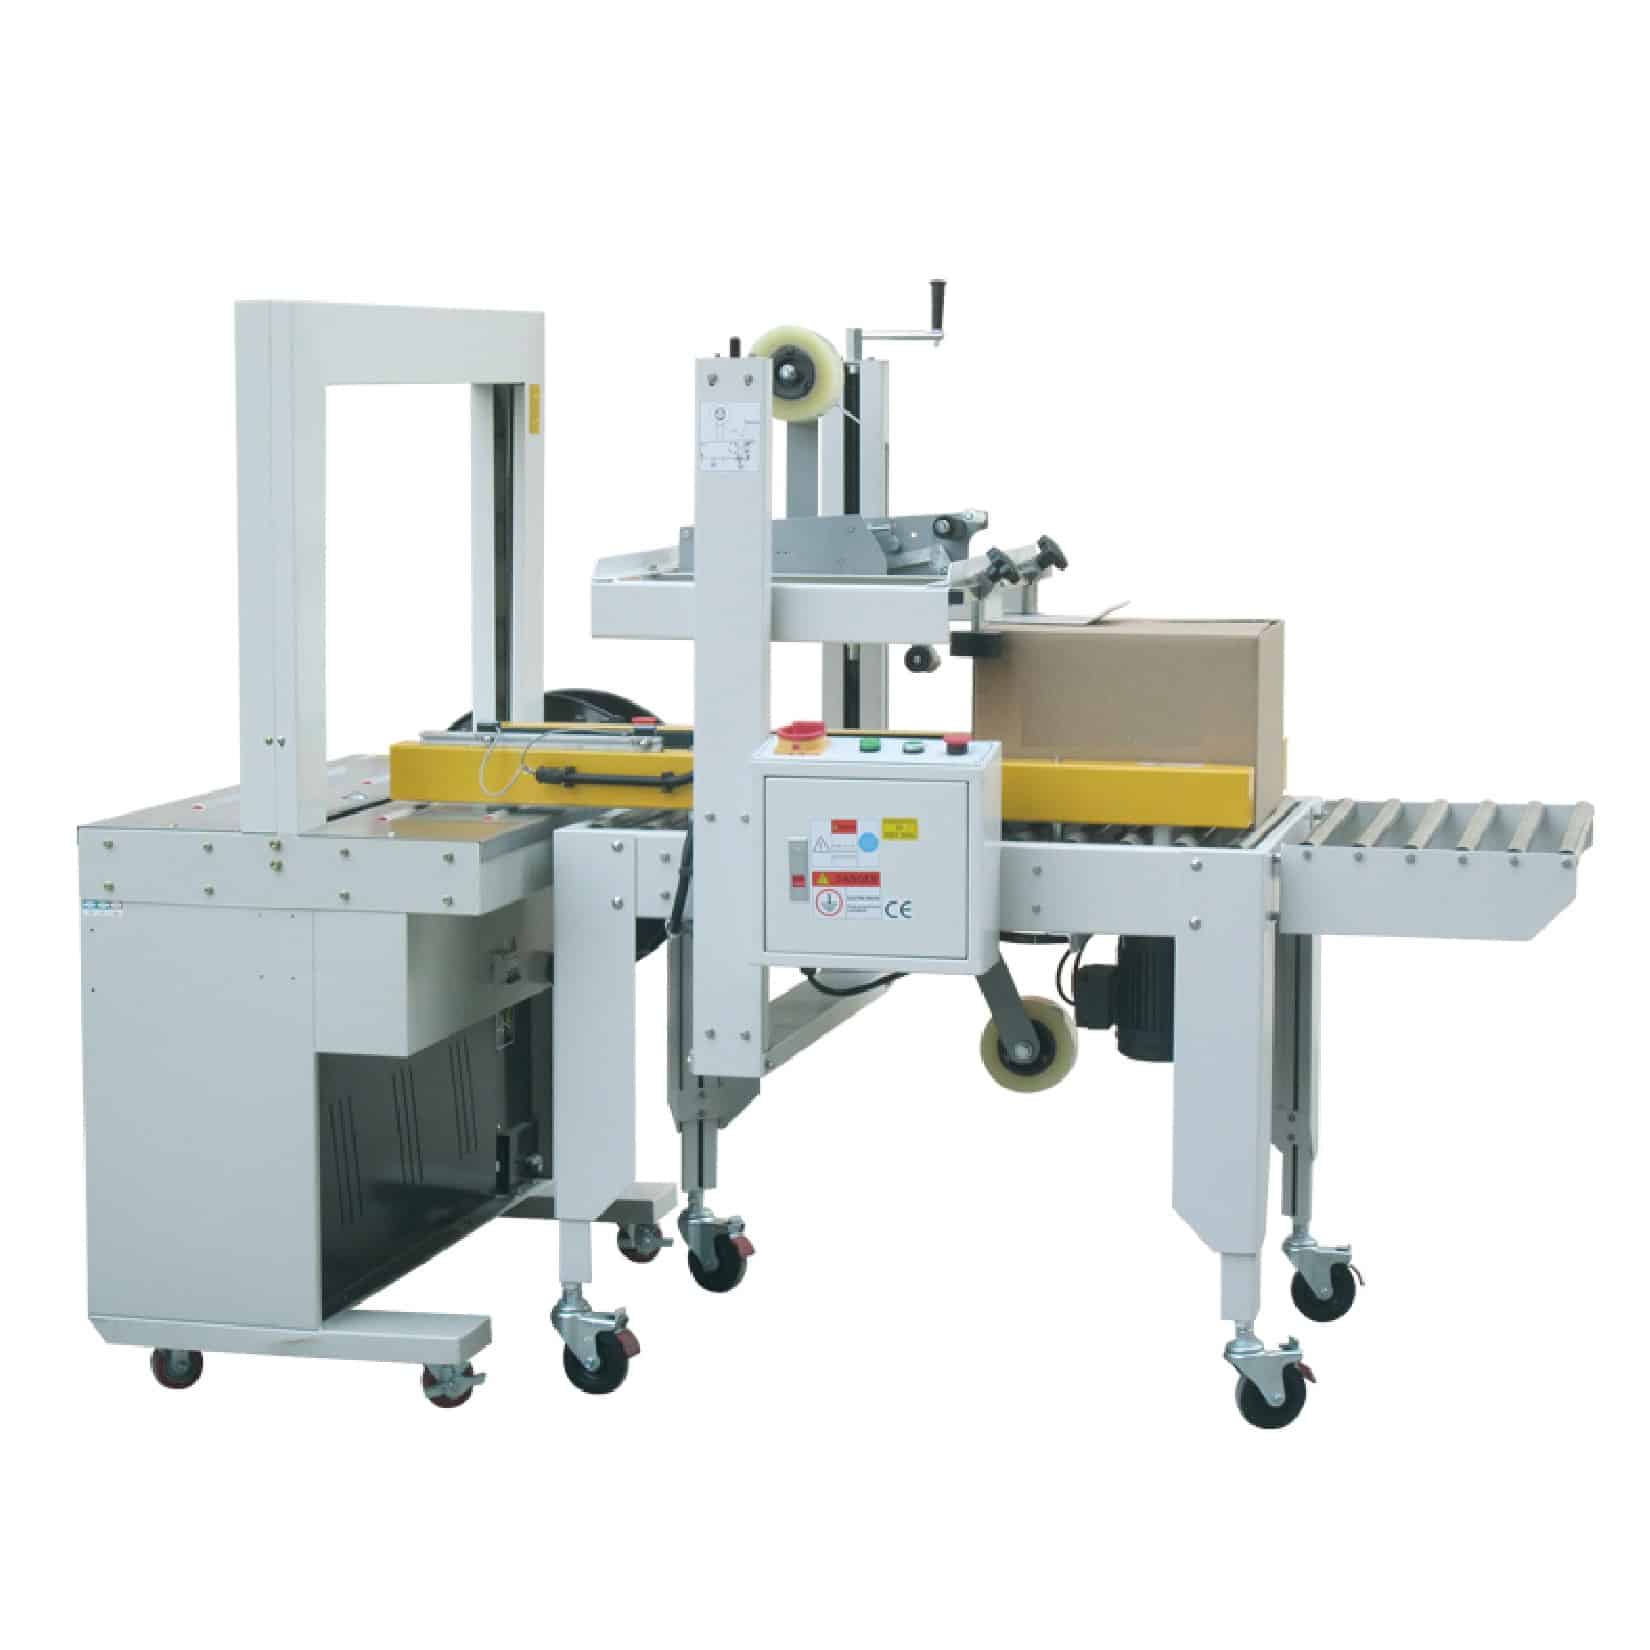 Carton sealer and strapping – OCSS-50A